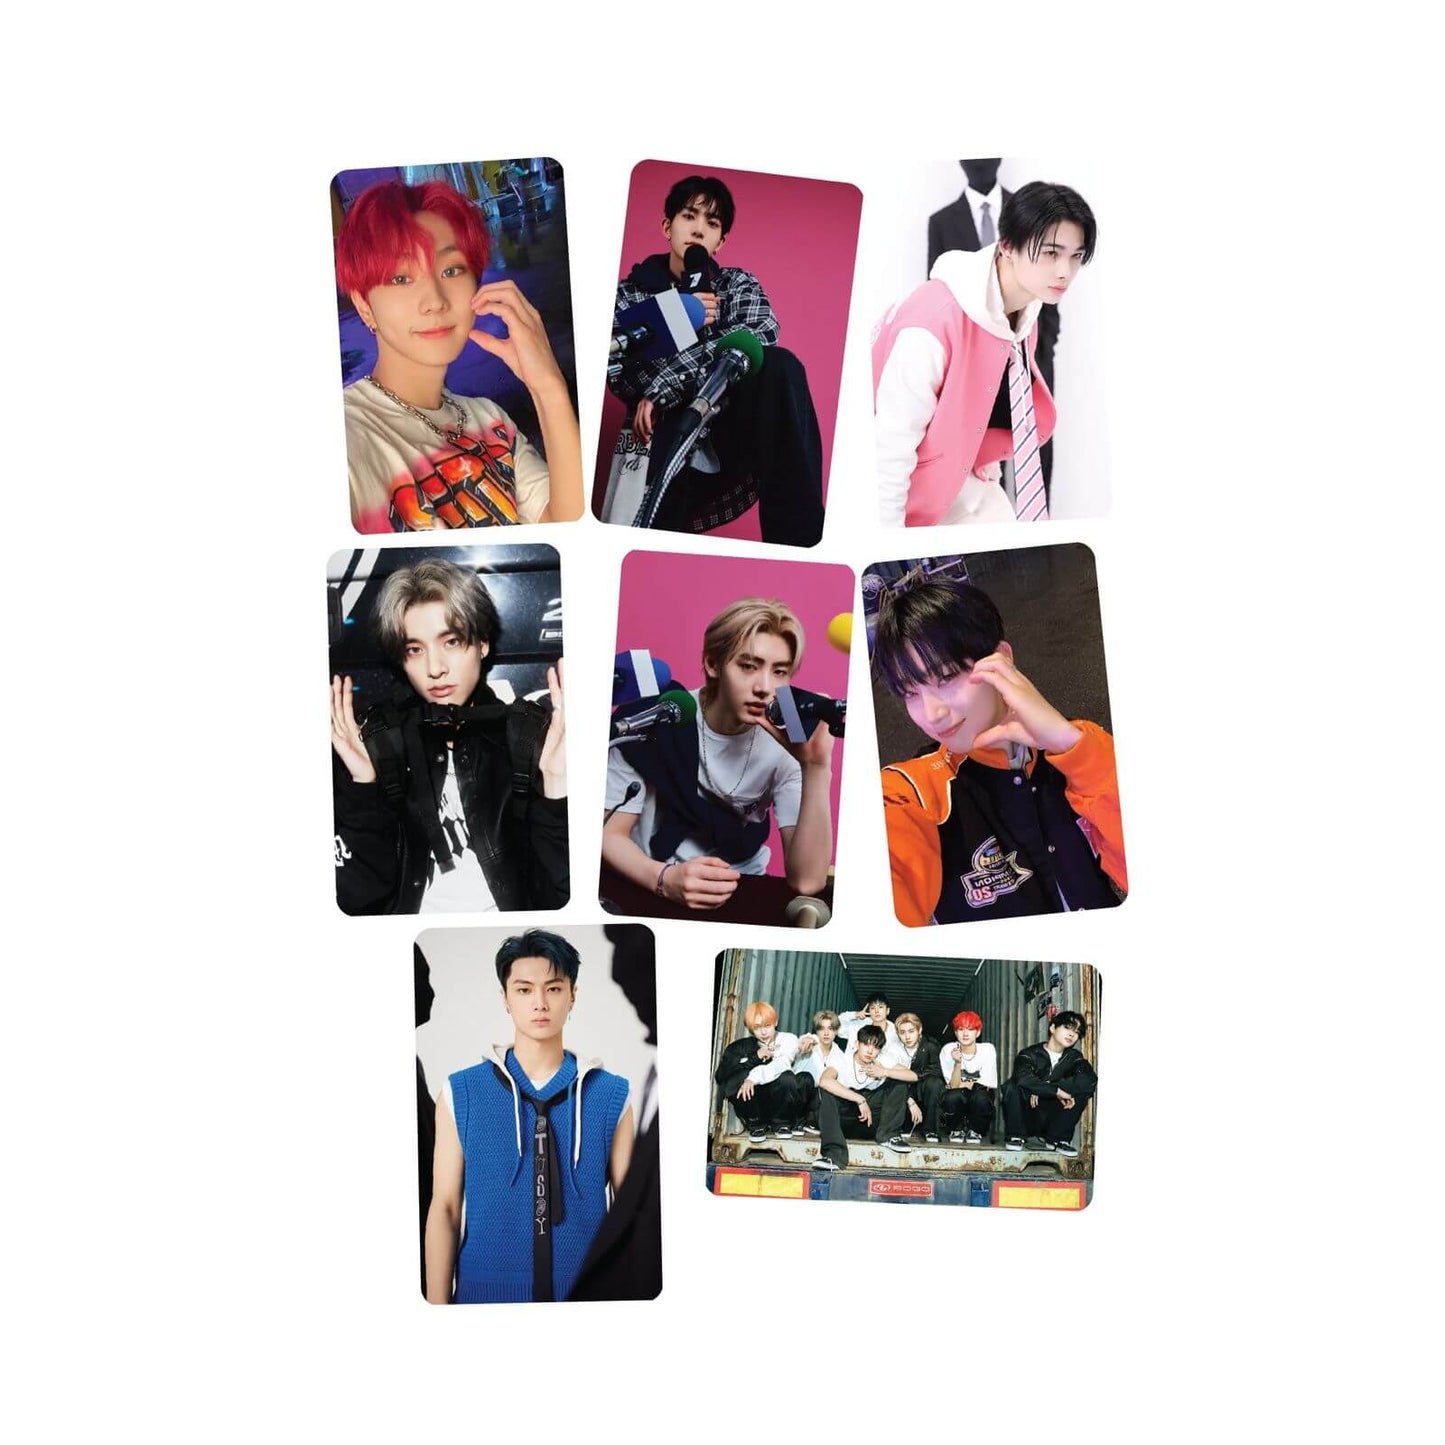 Enhypen Pass The Mic Photocards - Set of 8